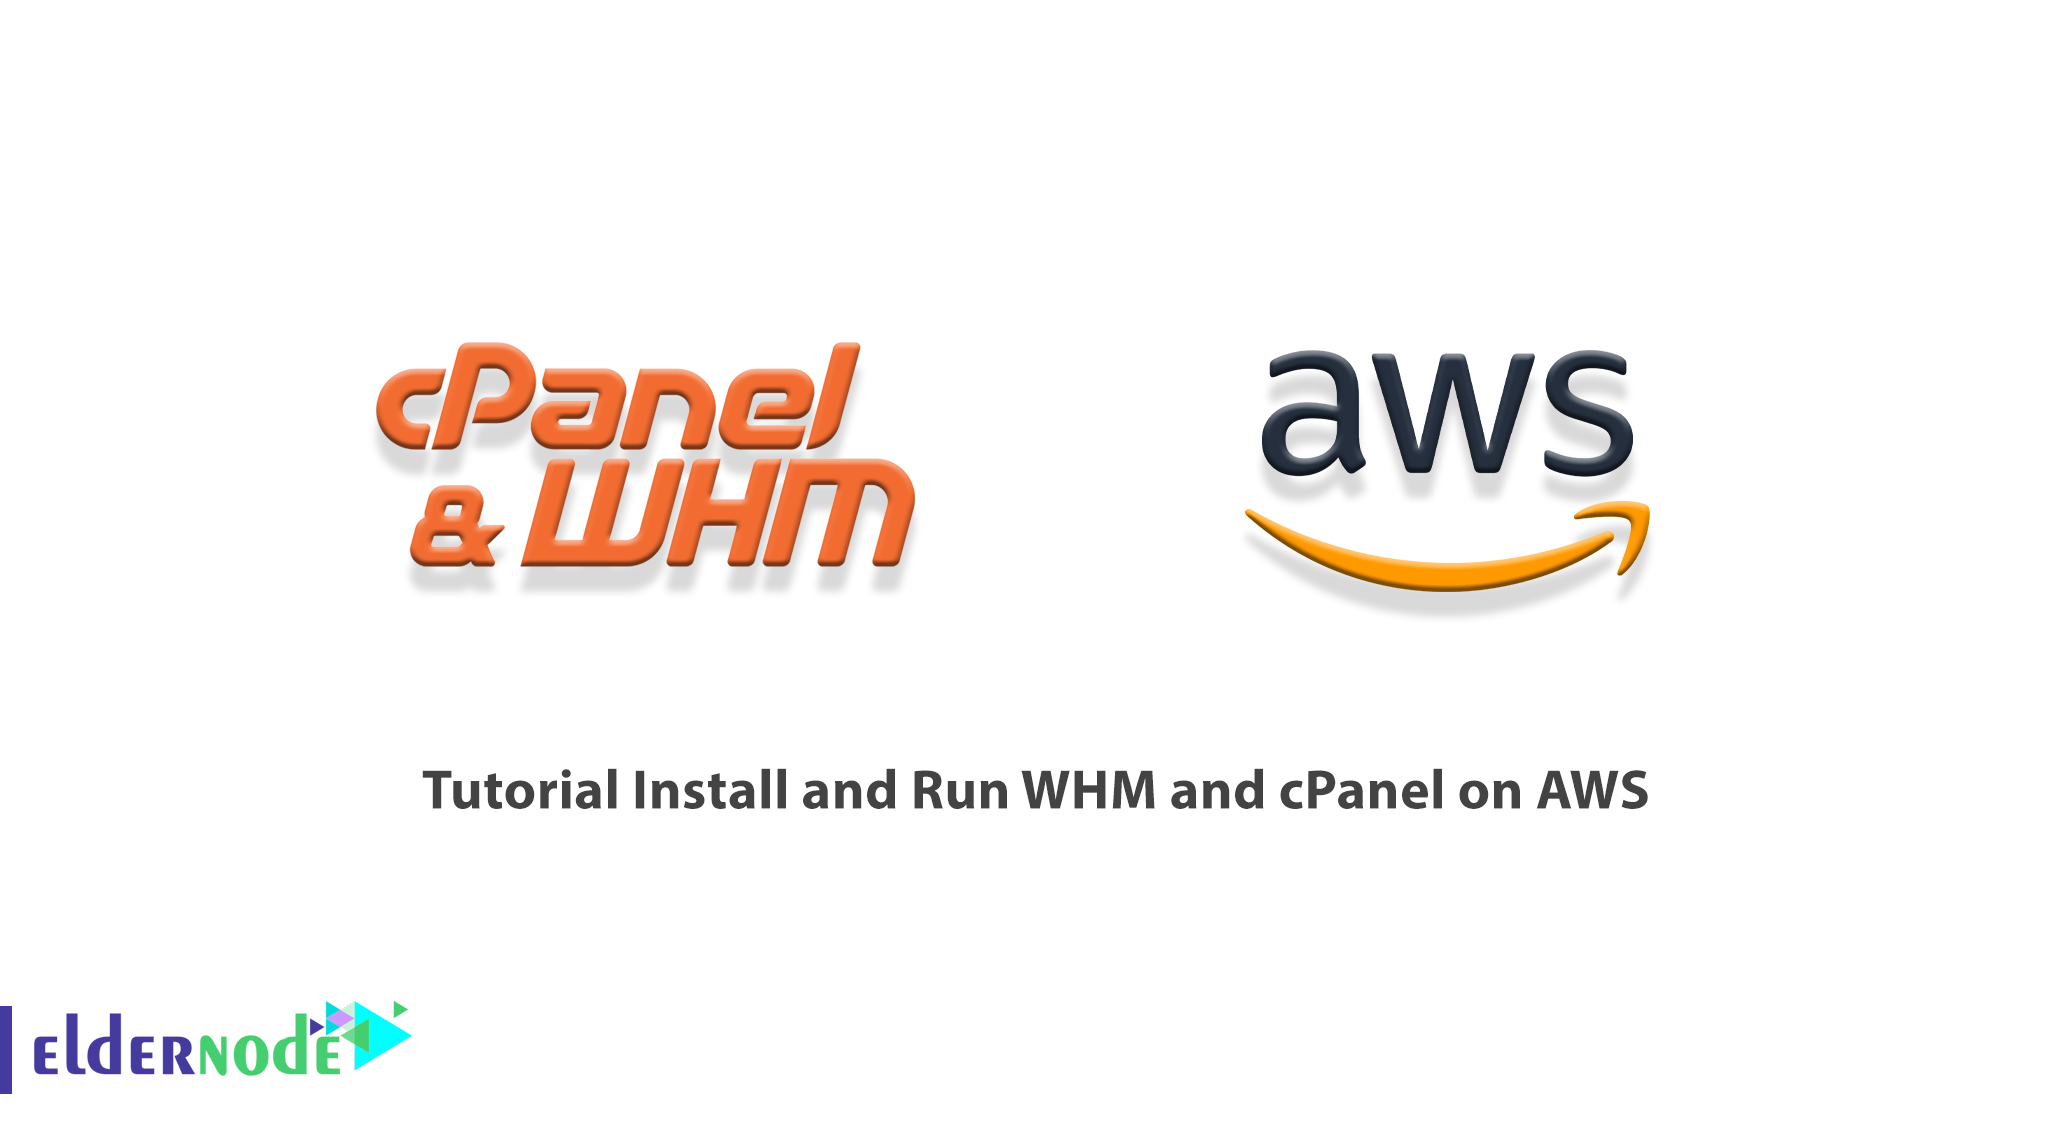 Tutorial Install and Run WHM and cPanel on AWS